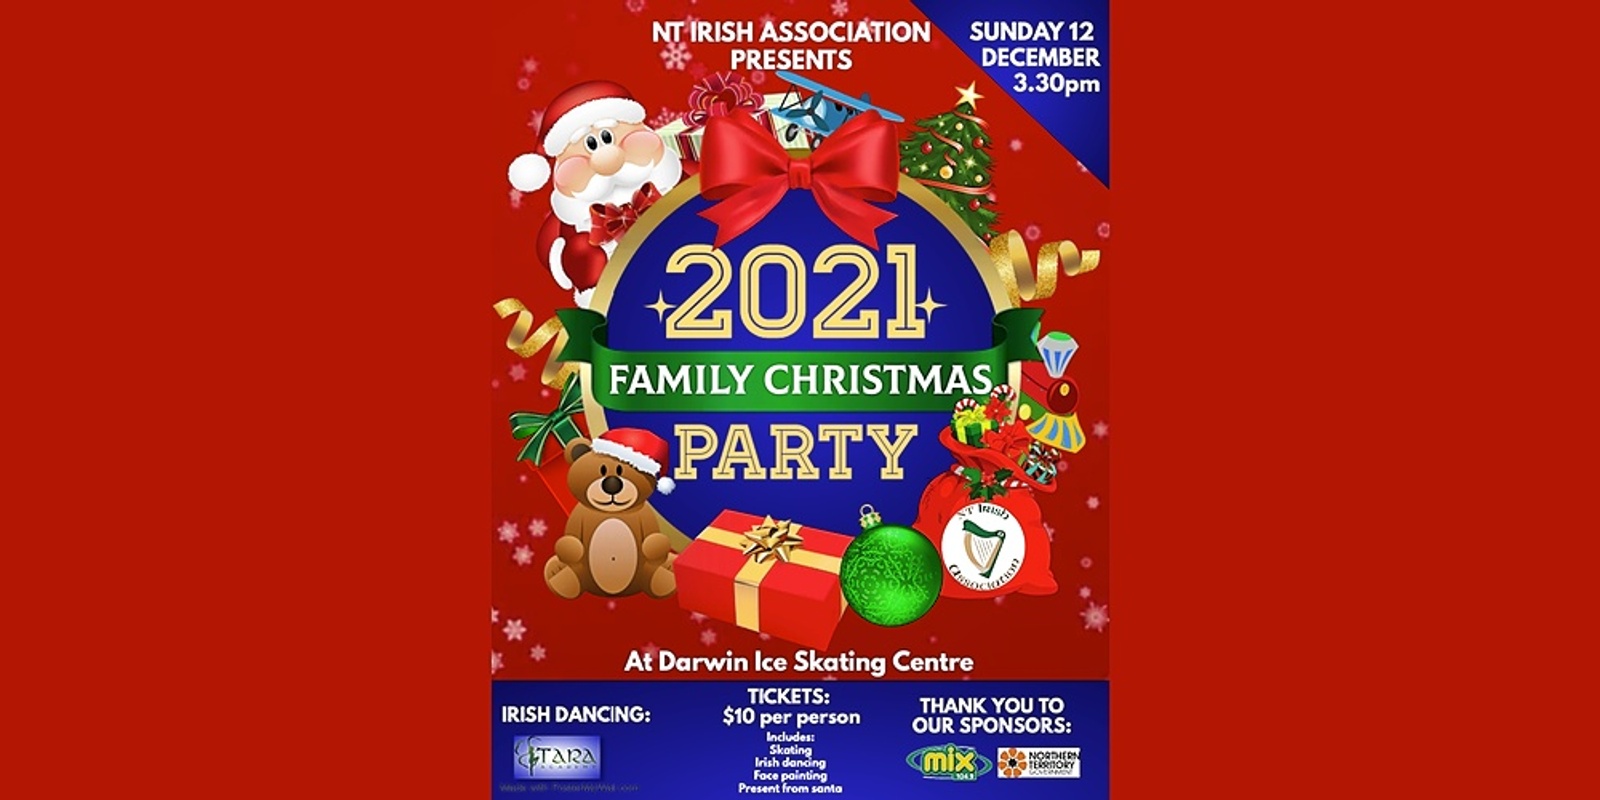 Banner image for NT Irish Association 2021 Family Christmas Party